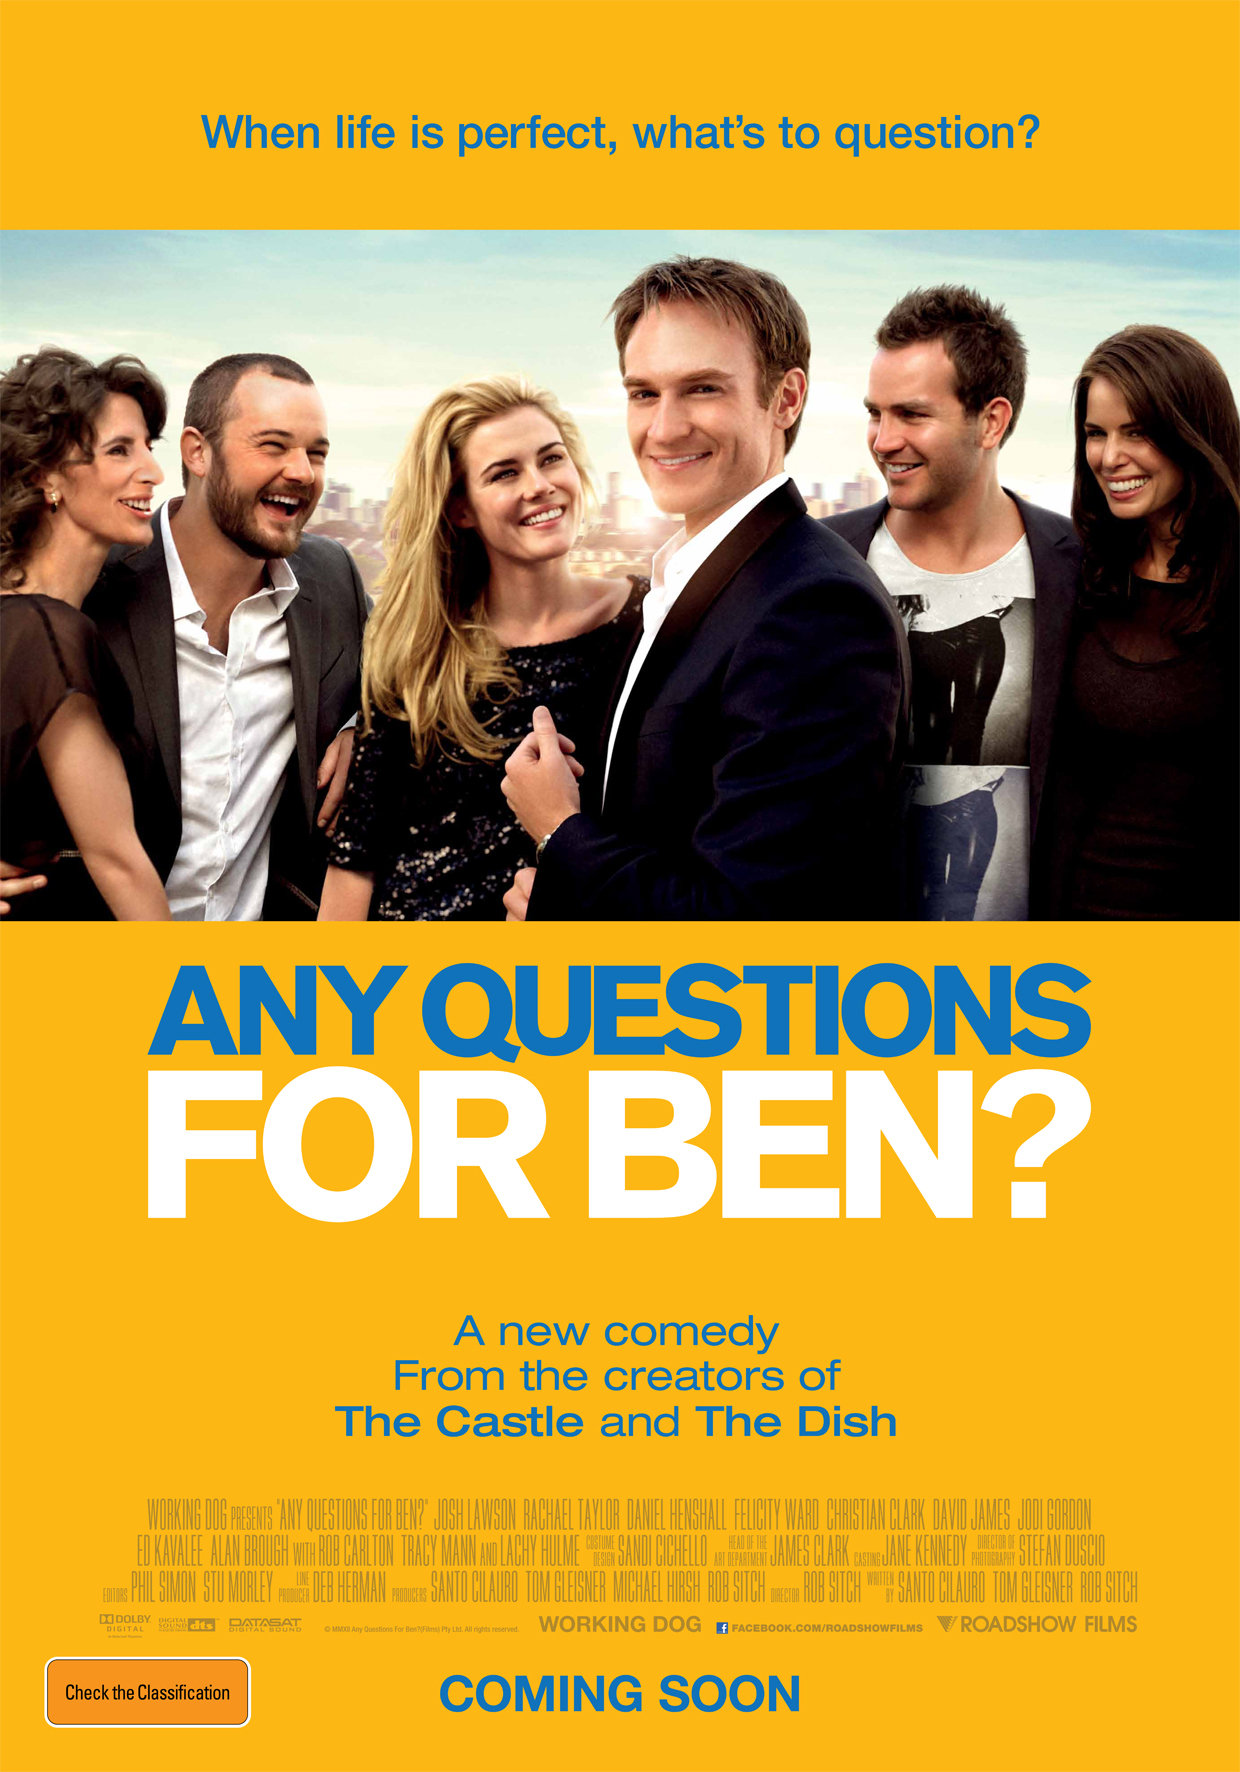 Any Questions For Ben scene nuda